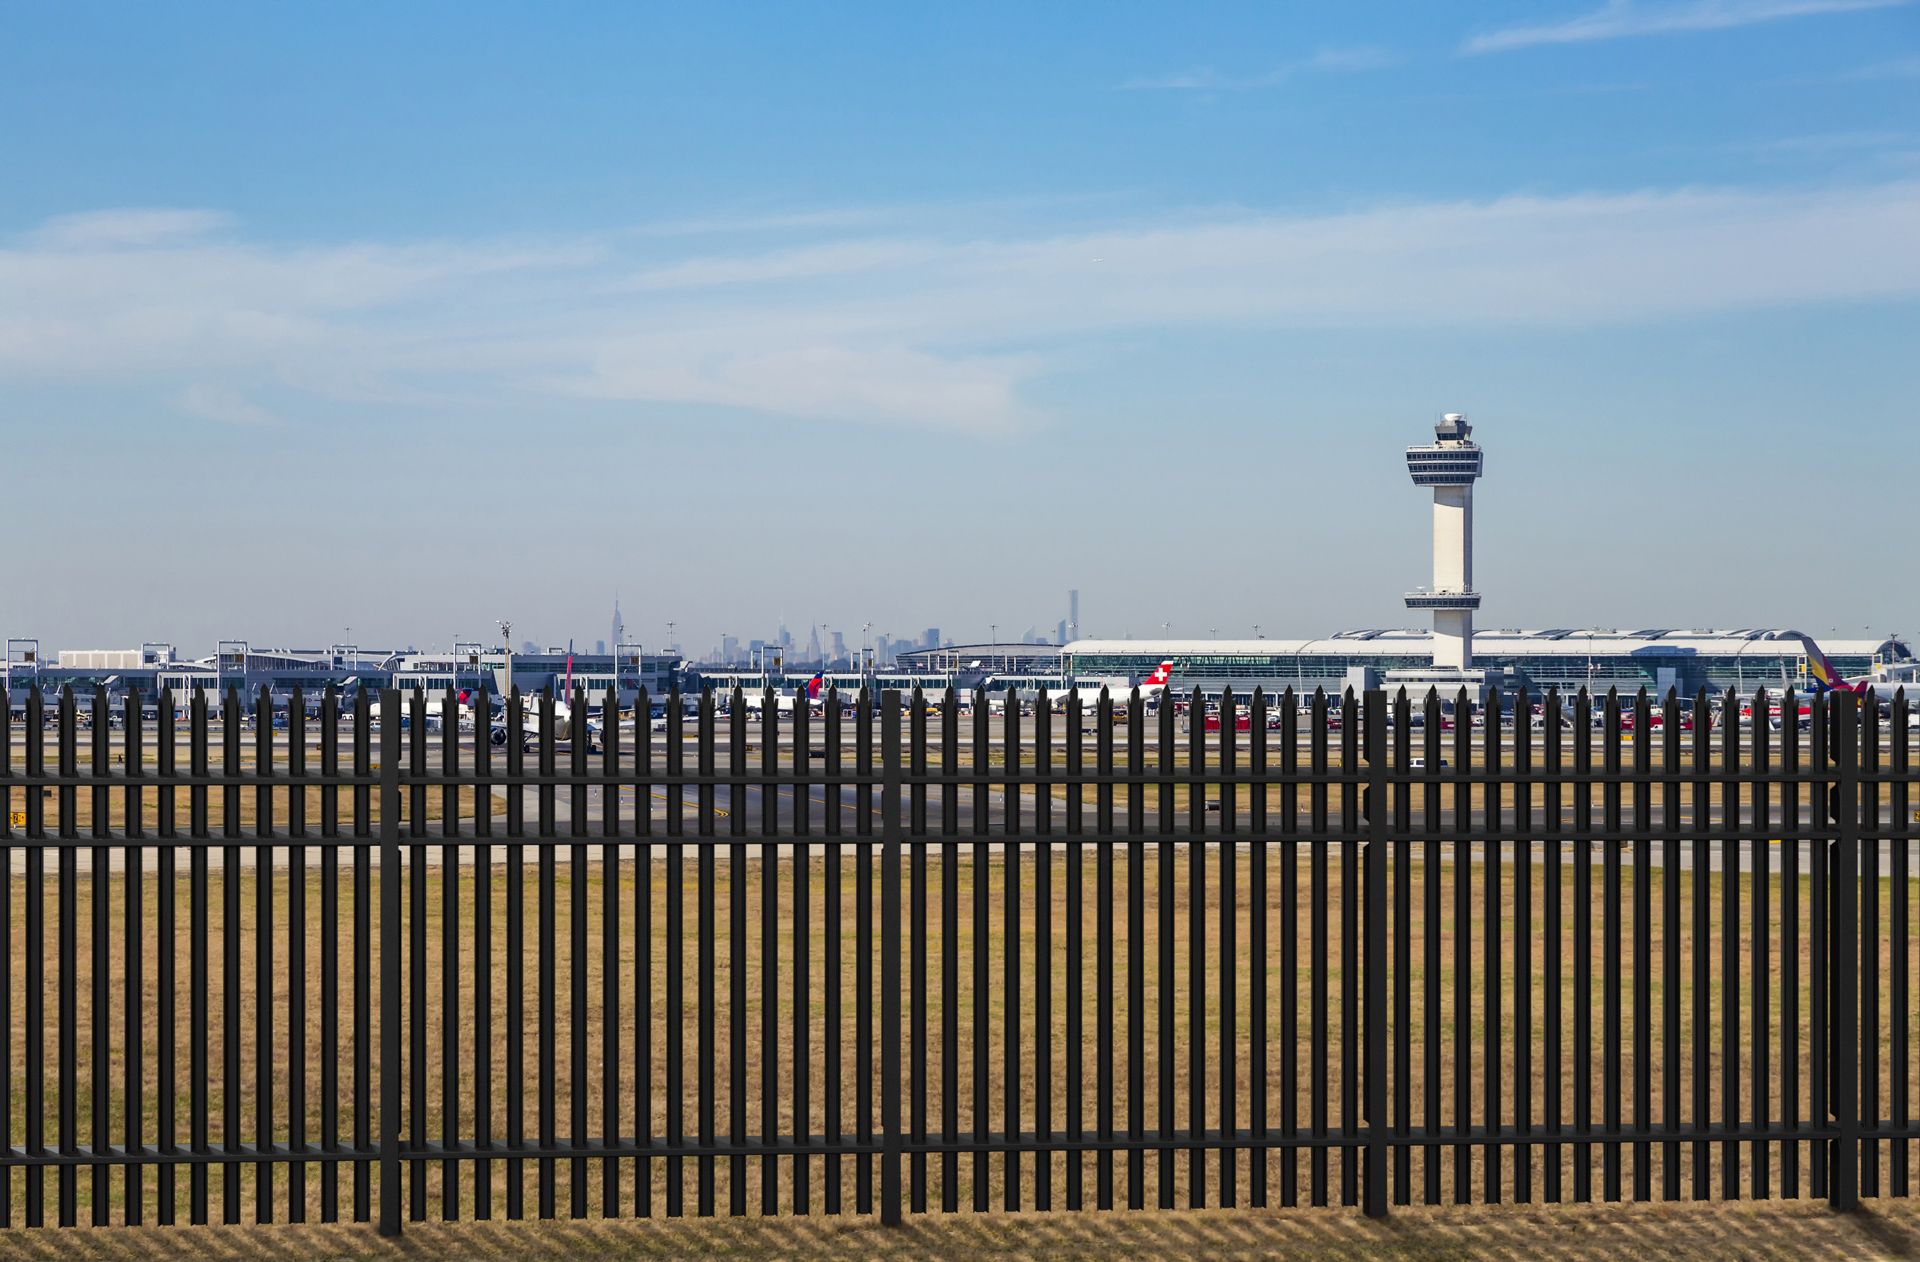 High security fencing surrounding airport